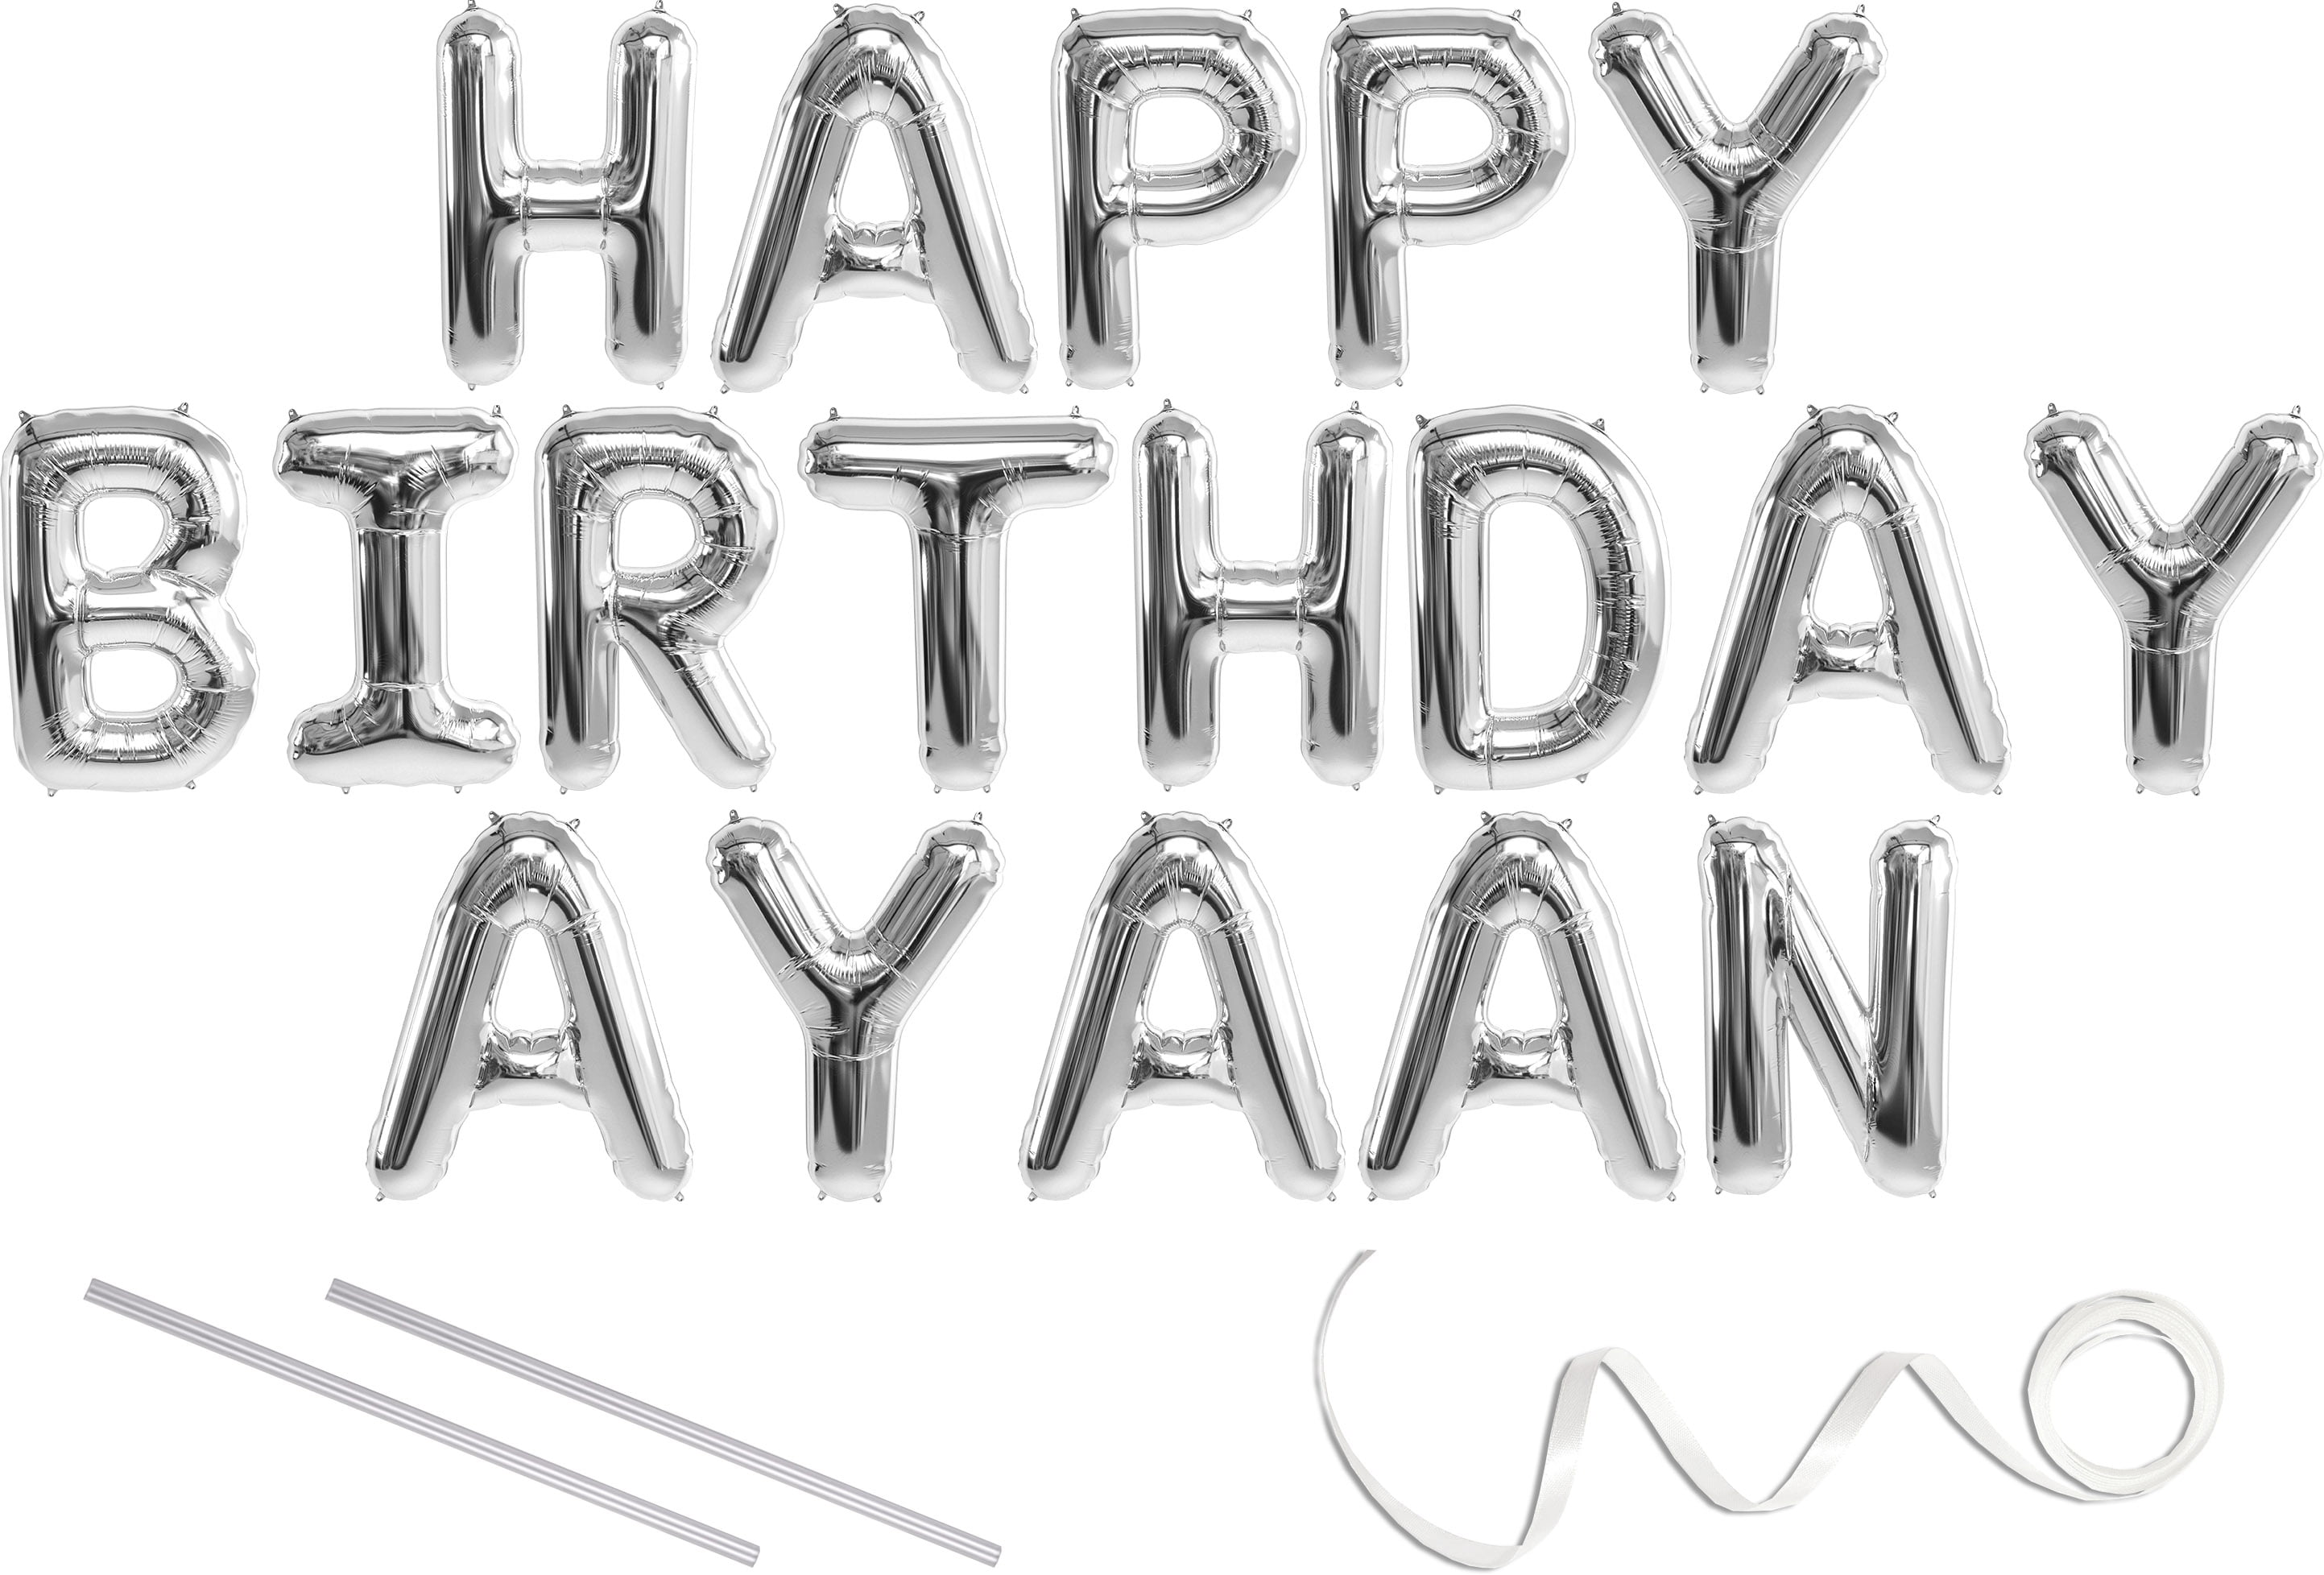 Ayaan Happy Birthday Mylar Balloon Banner Silver 16 Inch Letters Includes 2 Straws For Inflating String For Hanging Air Fill Only Does Not Float W Helium Great Birthday Decoration Walmart Com Walmart Com Starting from a simple good you can also find inspirational wishes for any of special occasions such as birthdays, love, weddings, anniversaries, special days of the year and. ayaan happy birthday mylar balloon banner silver 16 inch letters includes 2 straws for inflating string for hanging air fill only does not